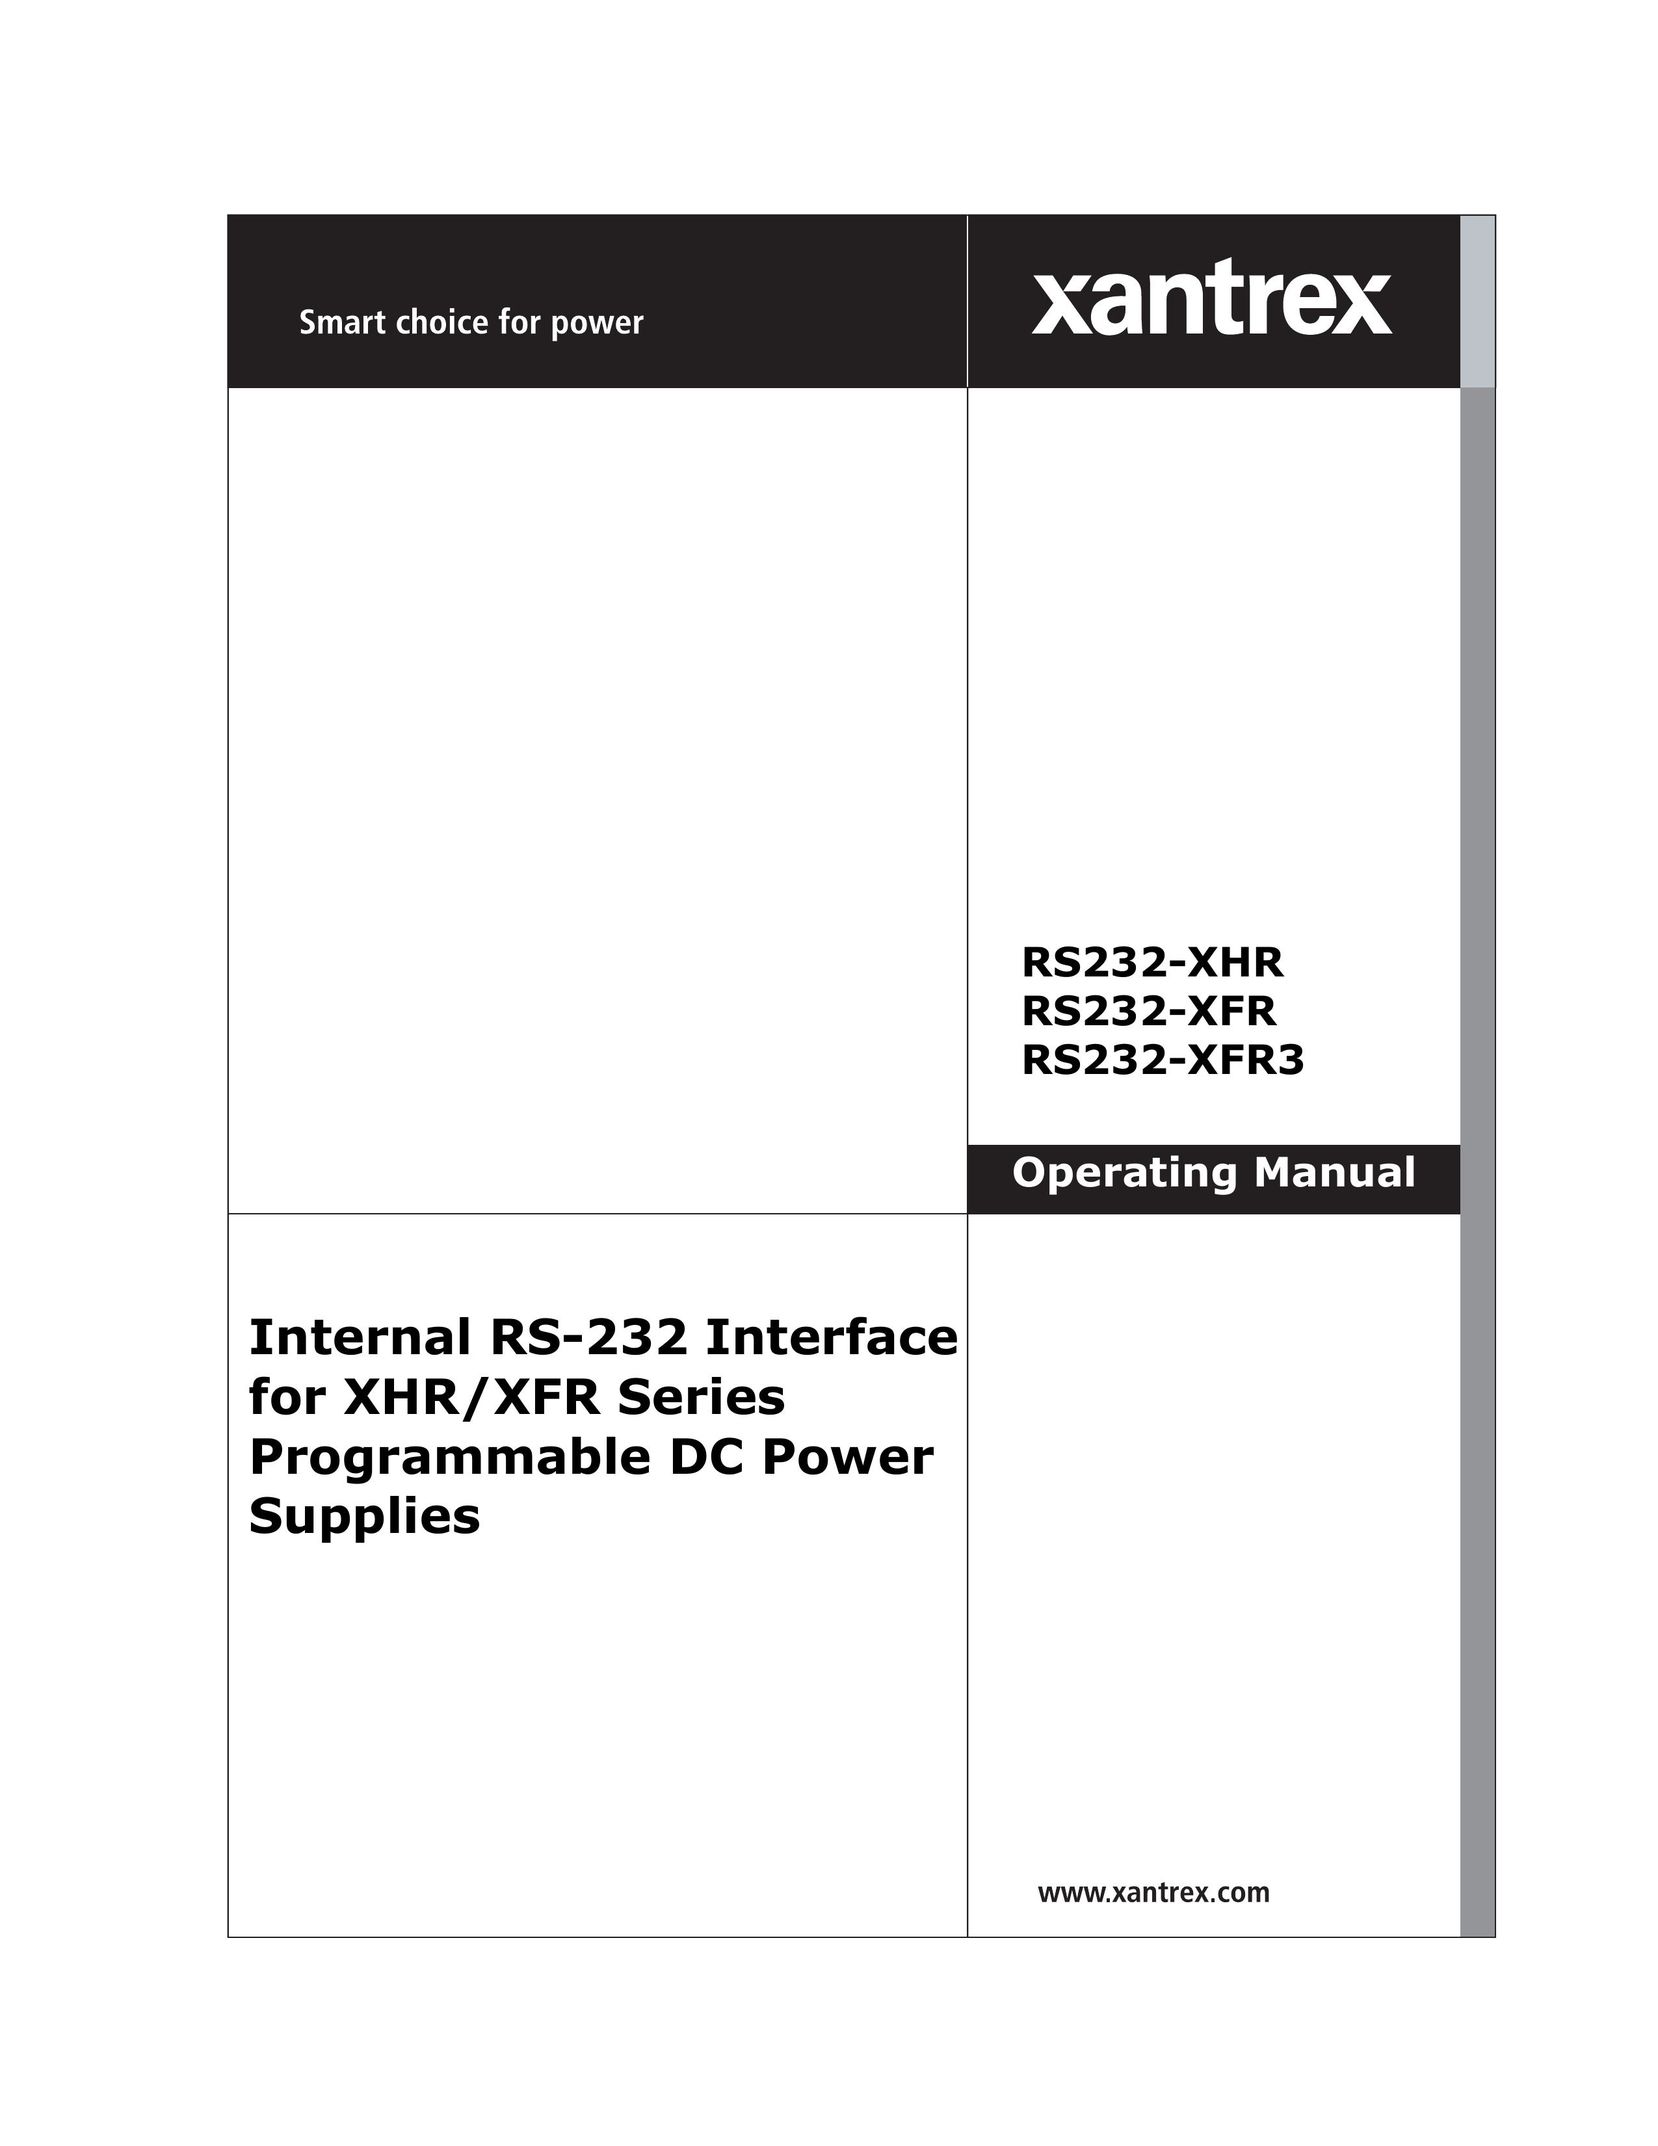 Xantrex Technology RS232-XHR Power Supply User Manual